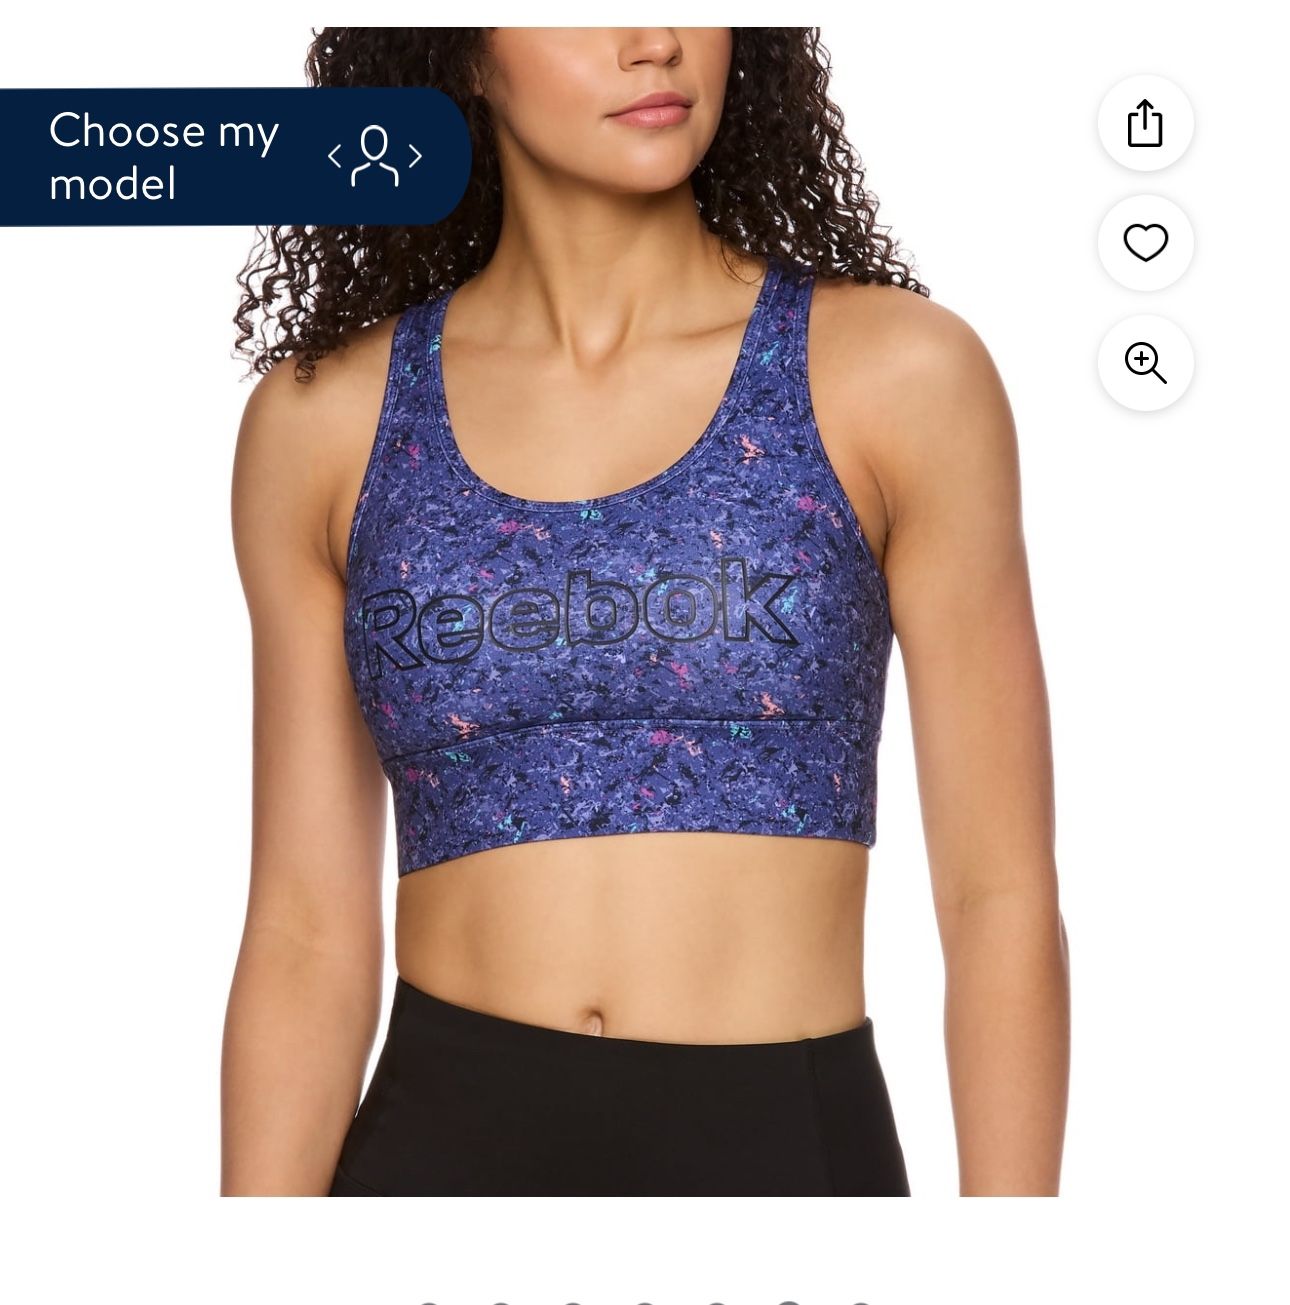 Reebok Women's Renew Longlined Printed Sports Bra with Removable Cups. size S $6.00 each